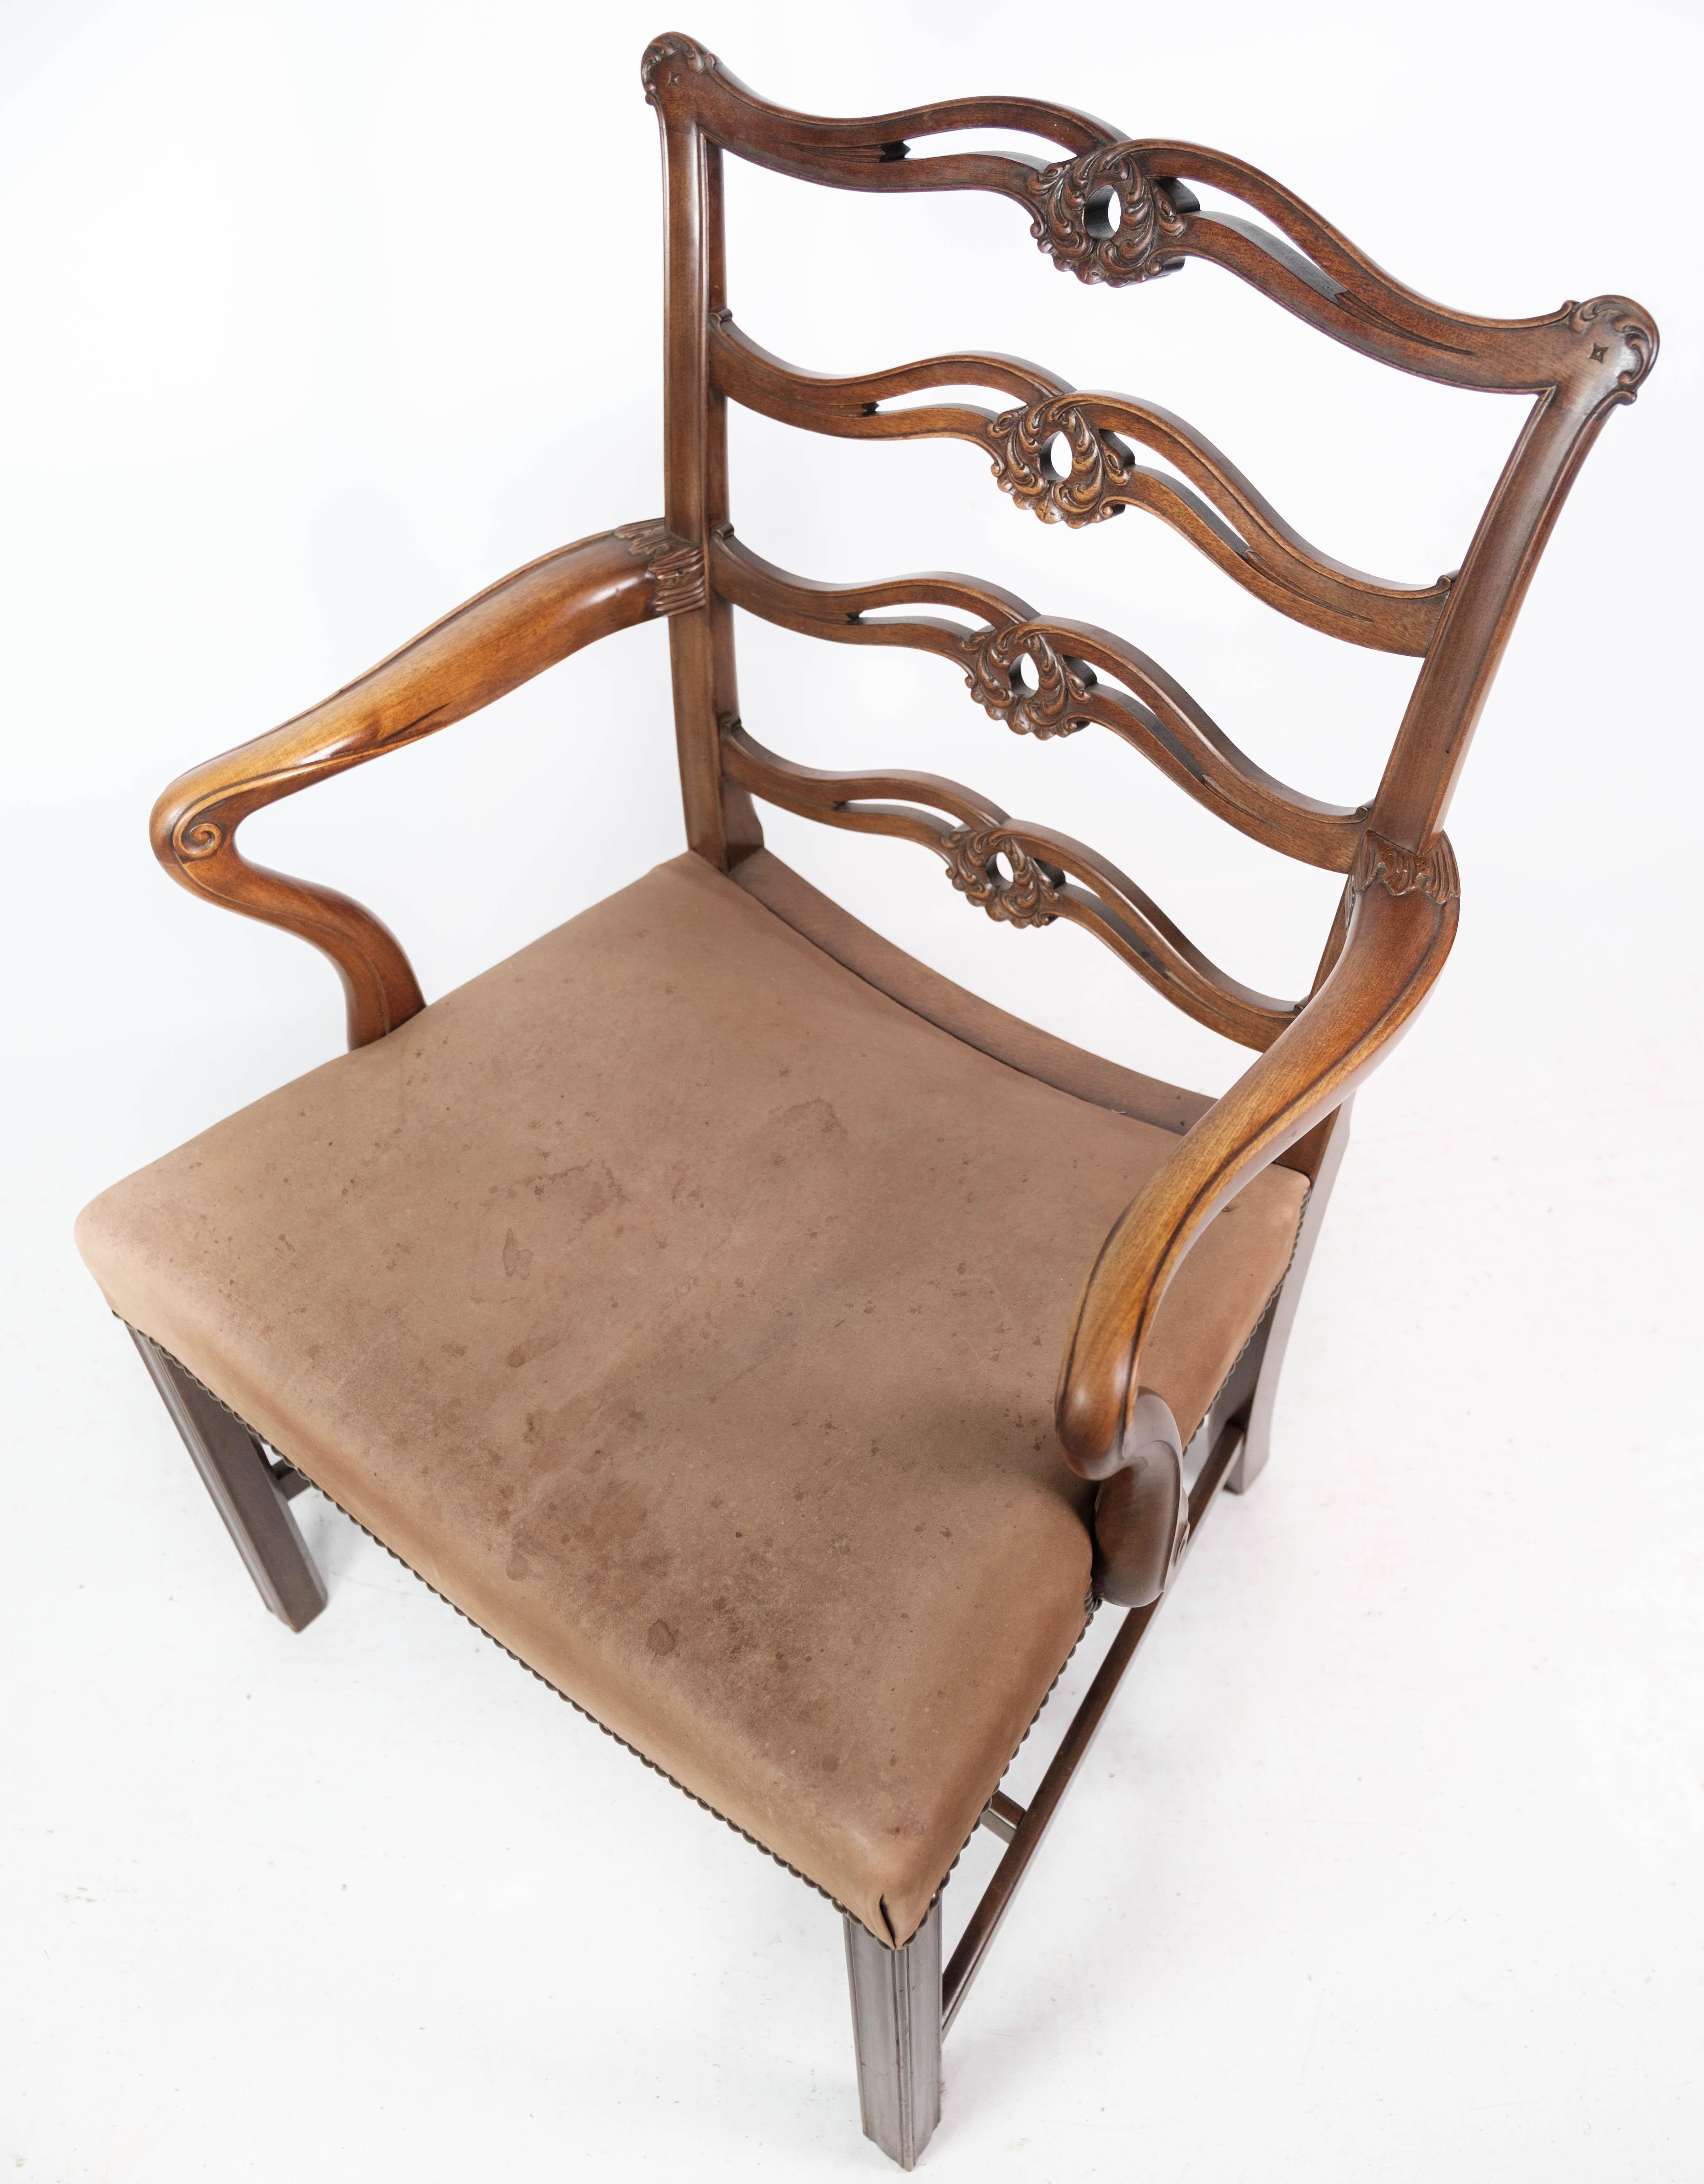 Other Antique Armchair of Mahogany and with Original Upholstery of Light Fabric, 1880s